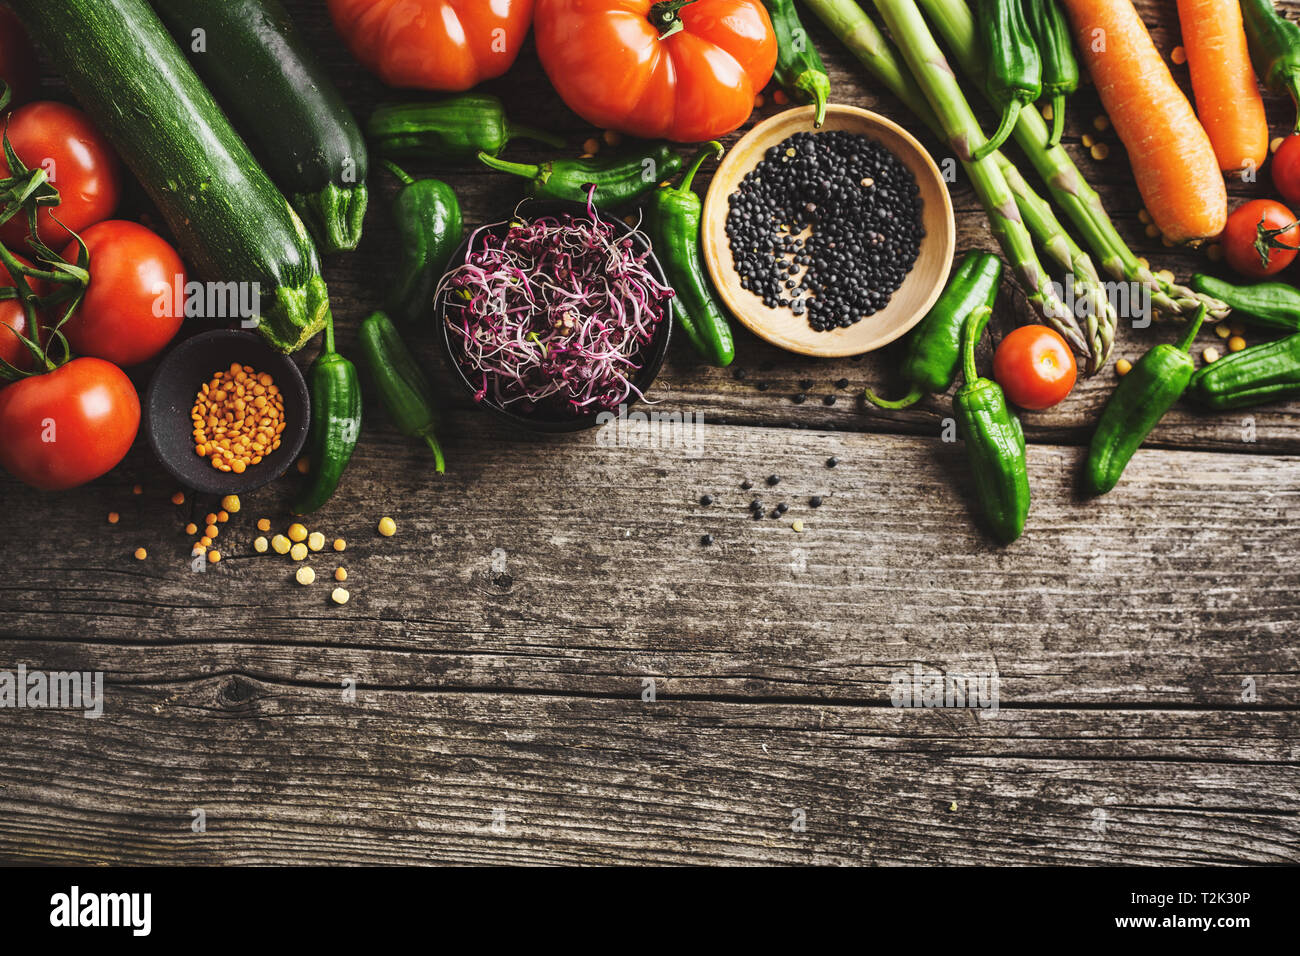 Healthy food background. Clean eating, vegan, vegetarian food concept. Different organic vegetables on wooden background. Top View with Copy Space. Stock Photo